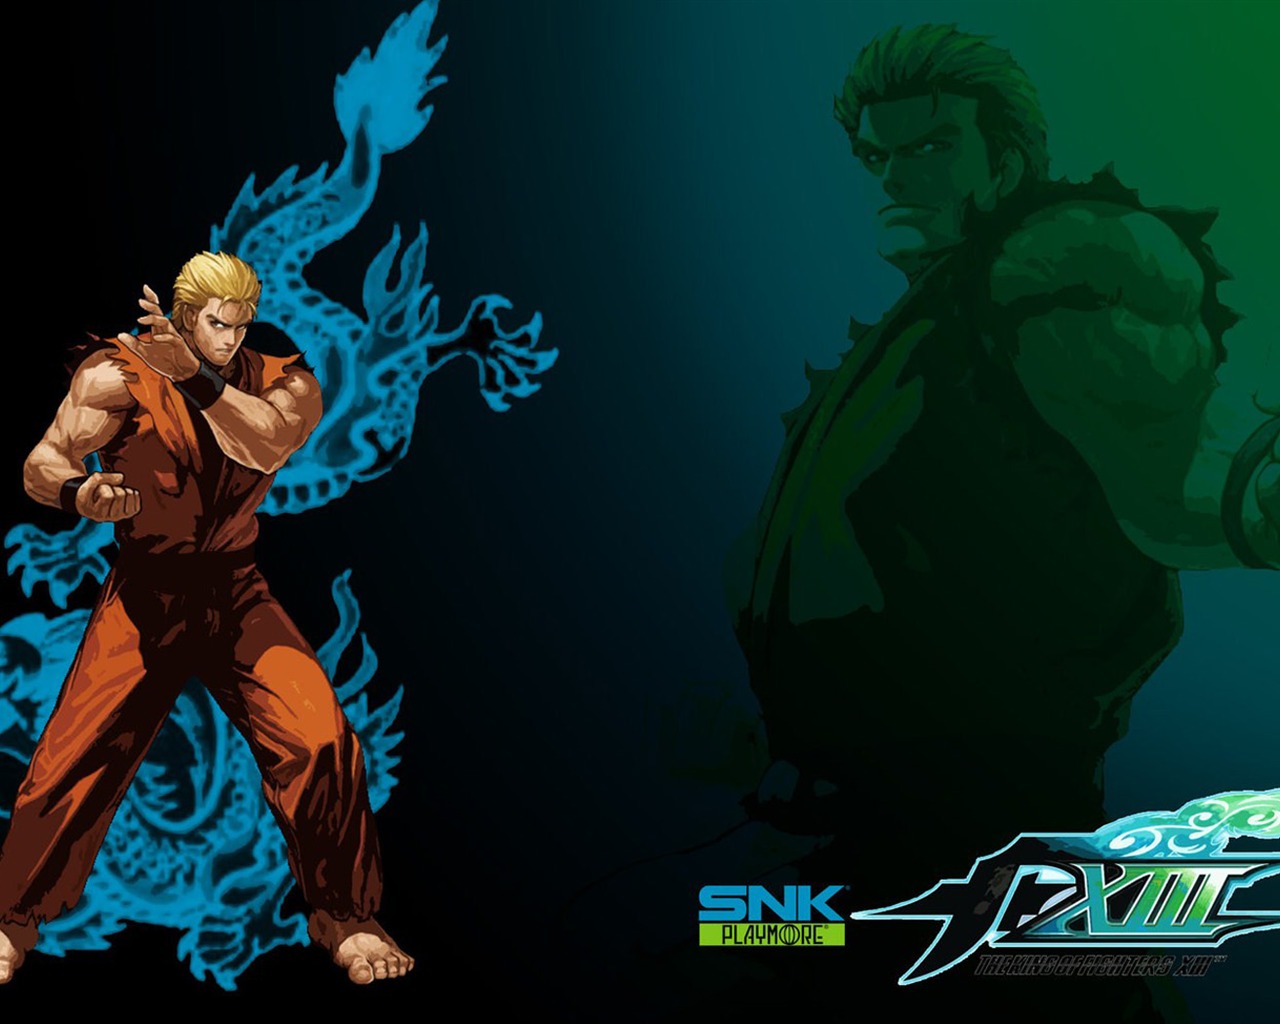 The King of Fighters XIII wallpapers #2 - 1280x1024